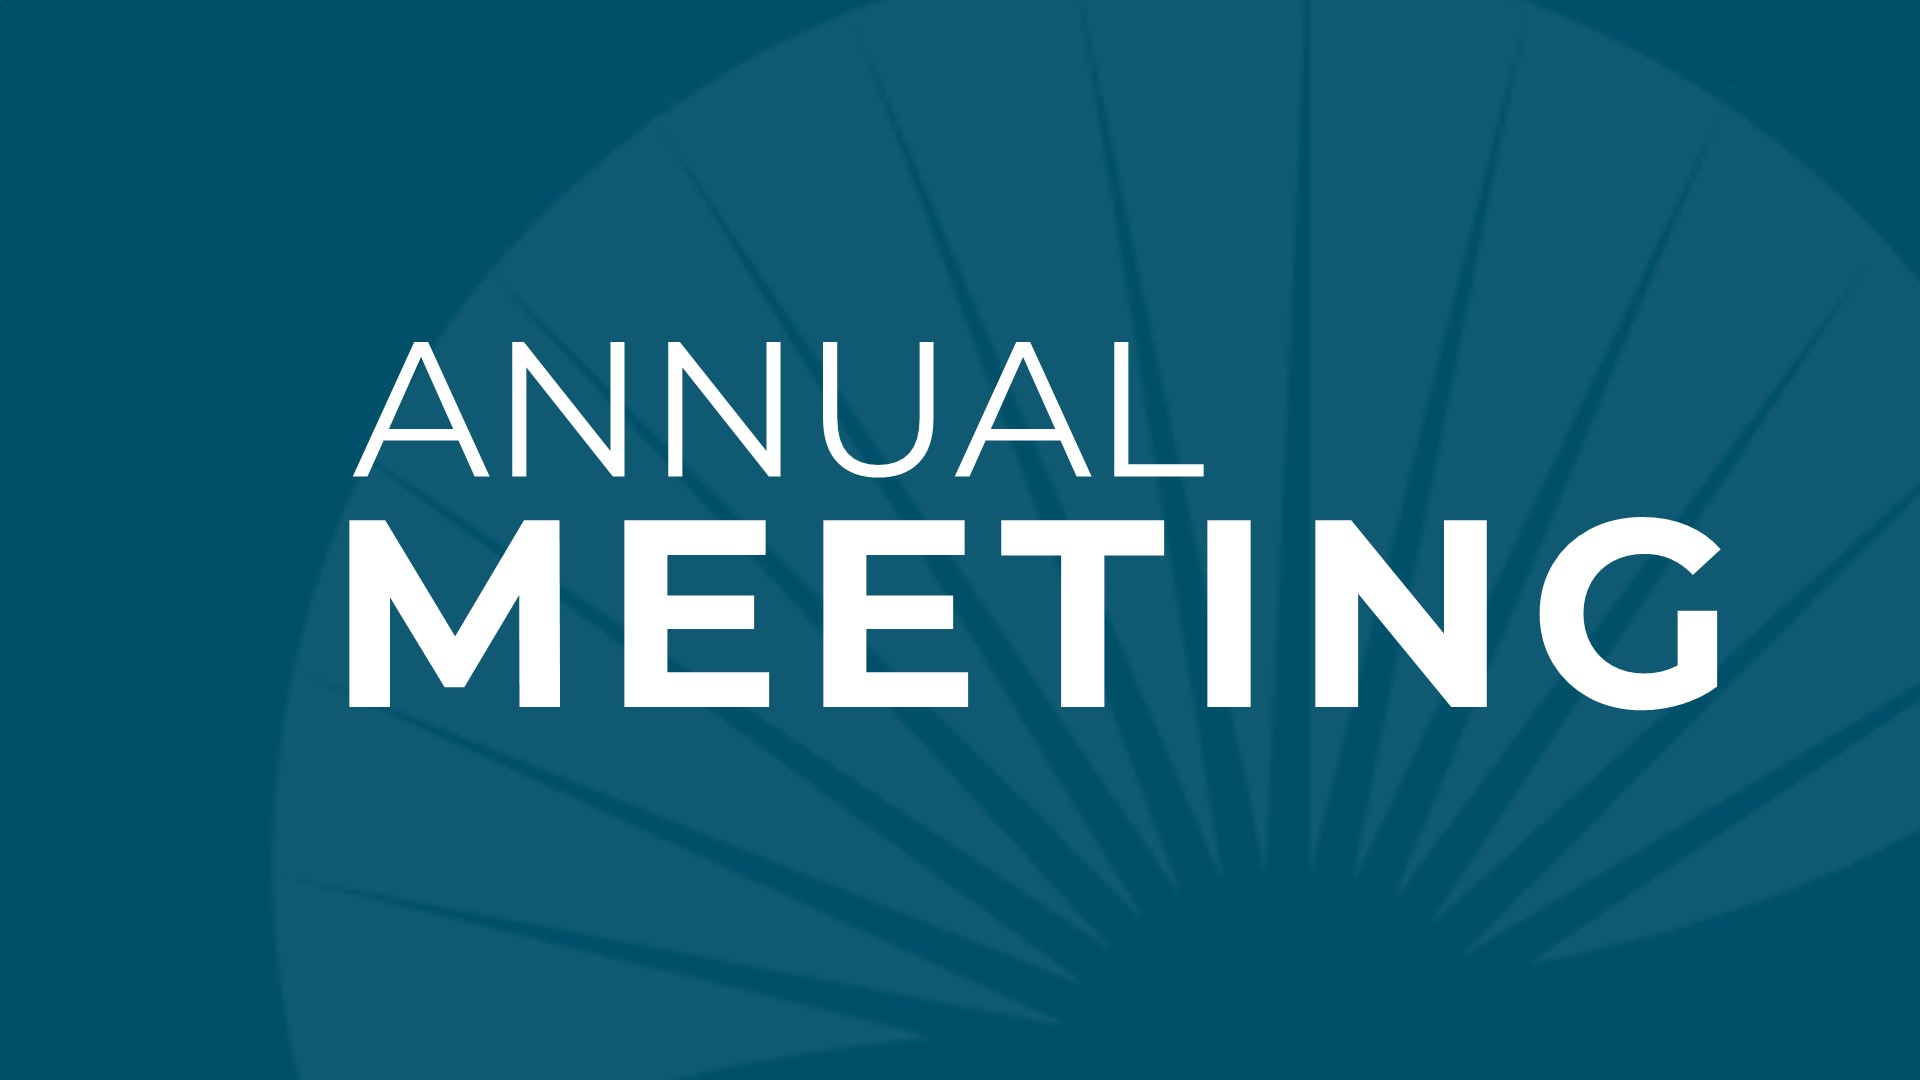 Annual Meeting Image